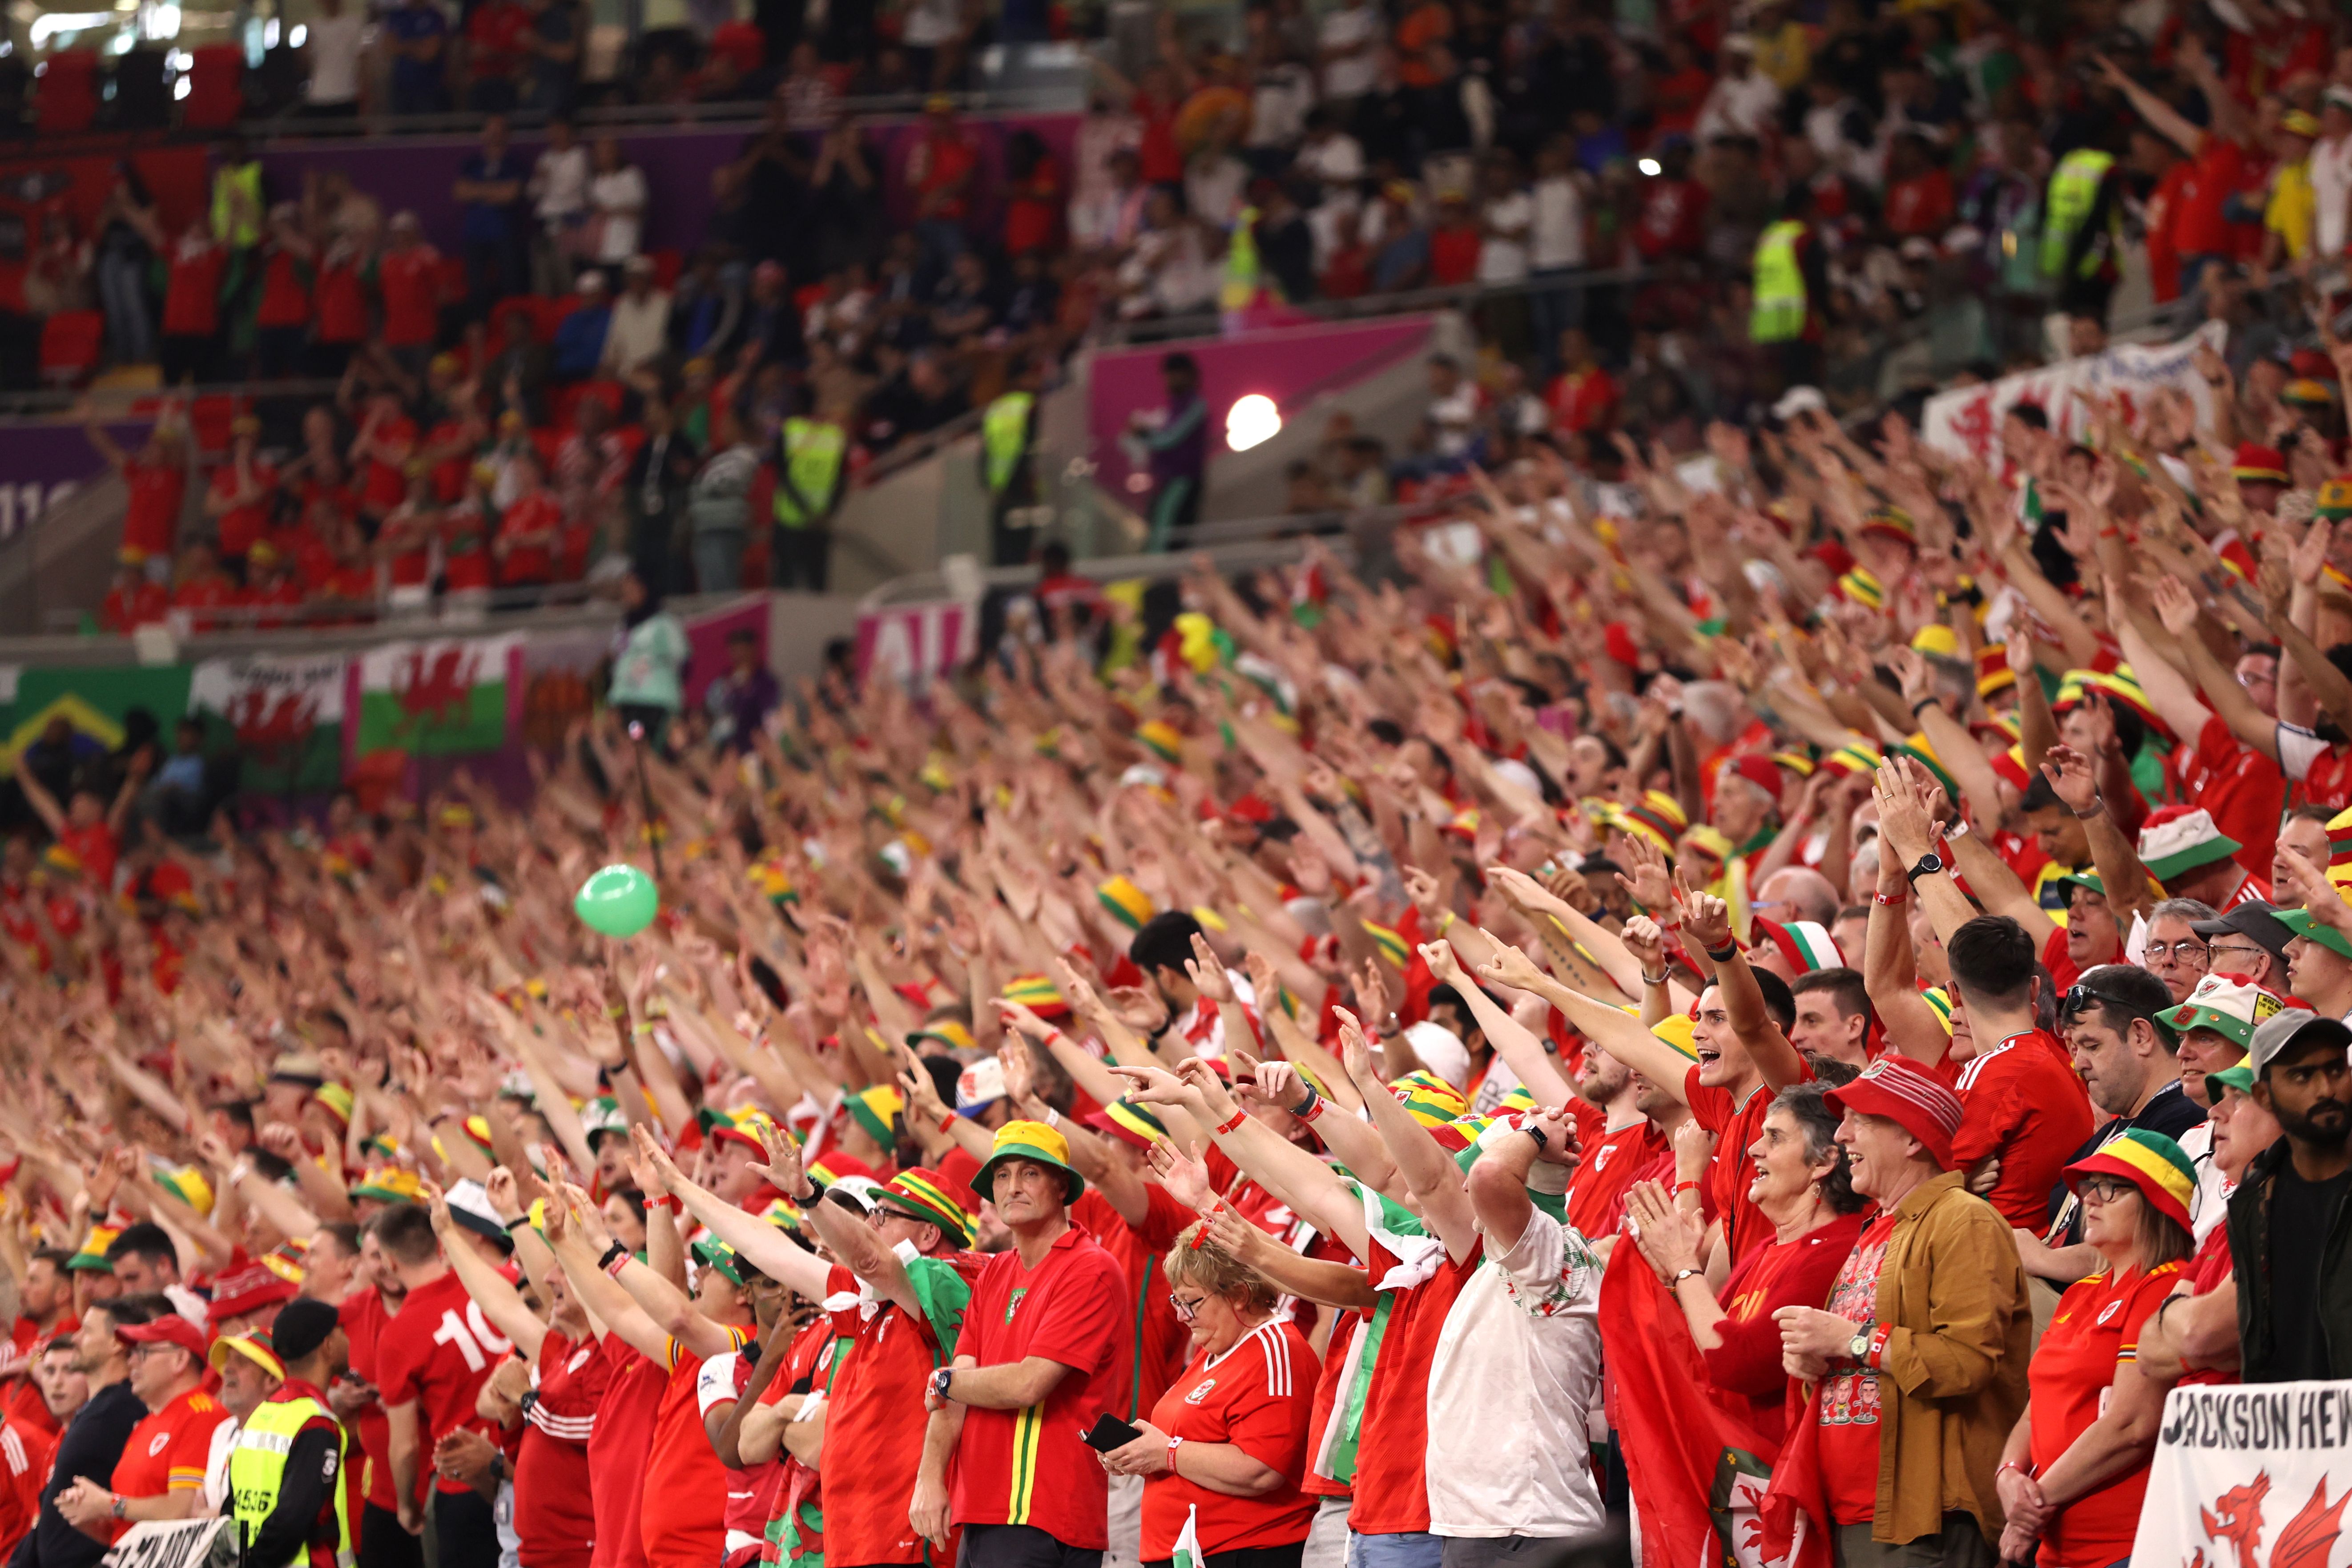 Wales fans were in fine voice at the World Cup